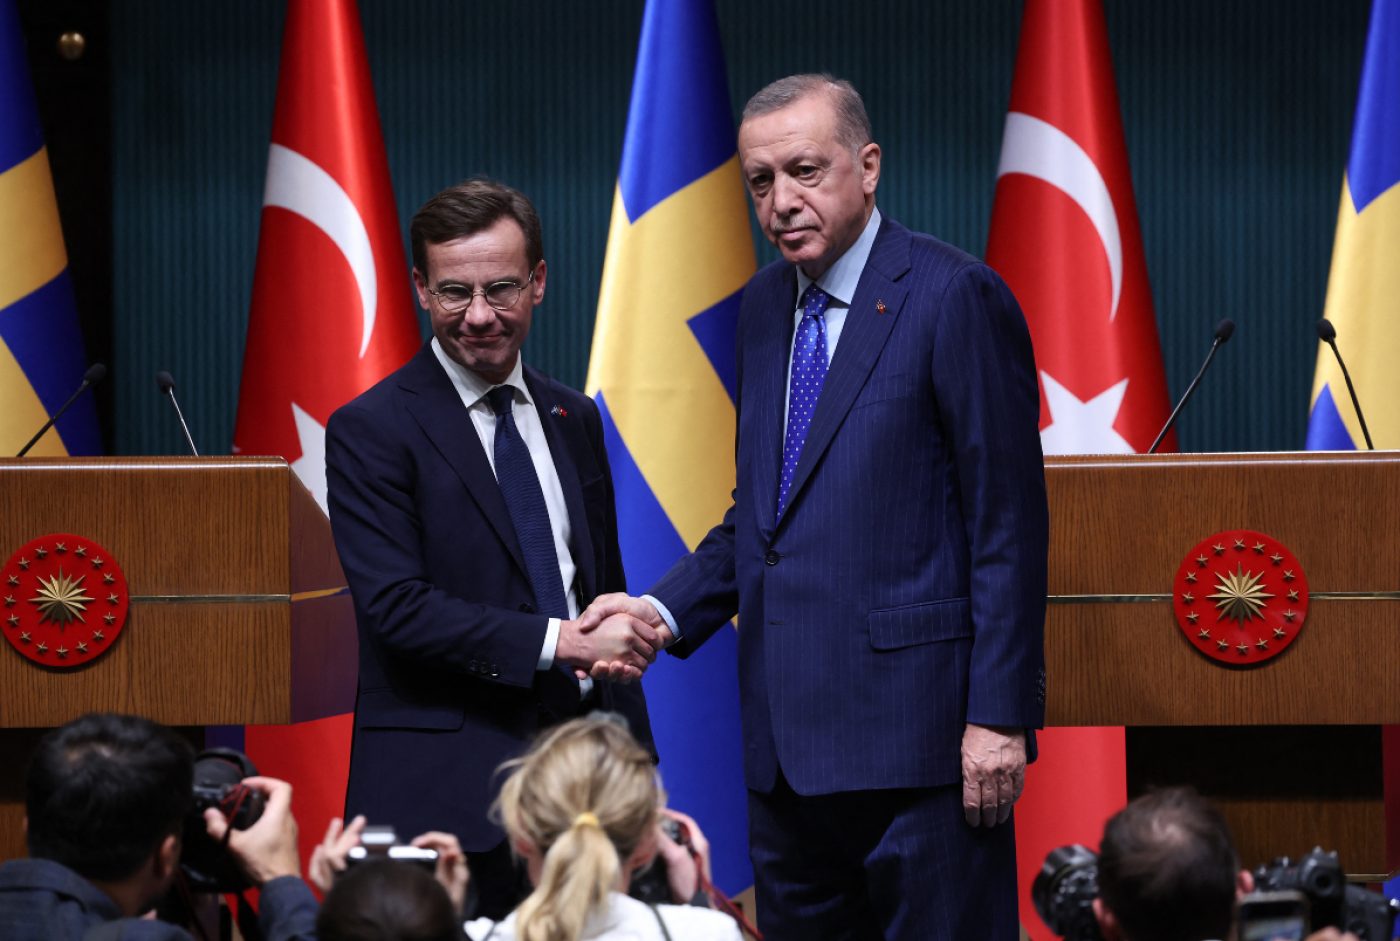 Turkish President Recep Tayyip Erdogan, right, shakes hand with Swedish Prime Minister Ulf Kristersson during a press conference following their meeting at the presidential palace in Ankara, on 8 November 2022 (AFP) 